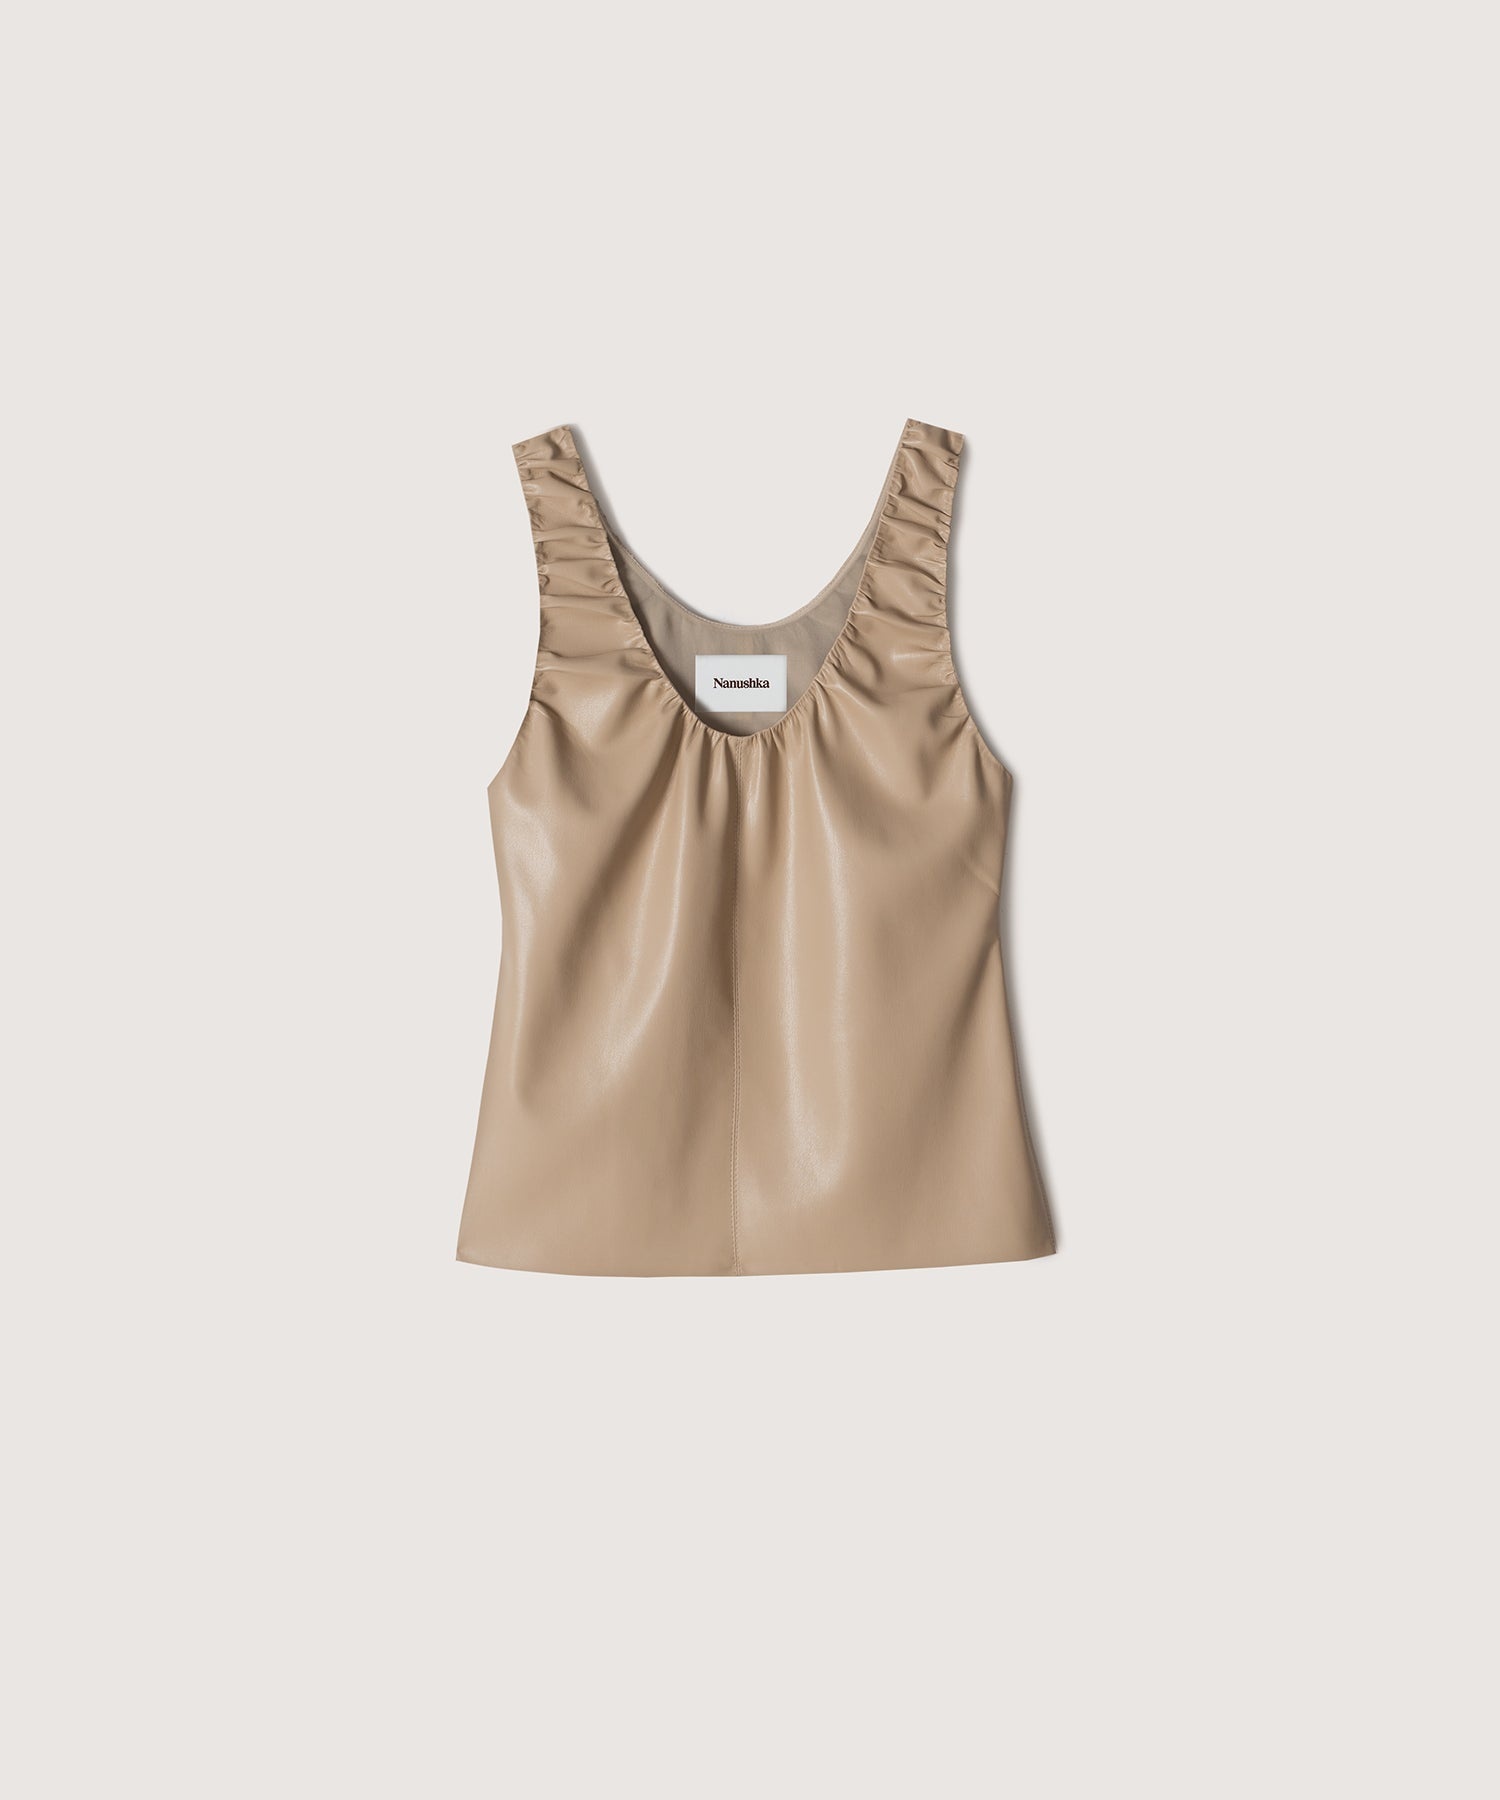 Ruched Vegan Leather Top - 3